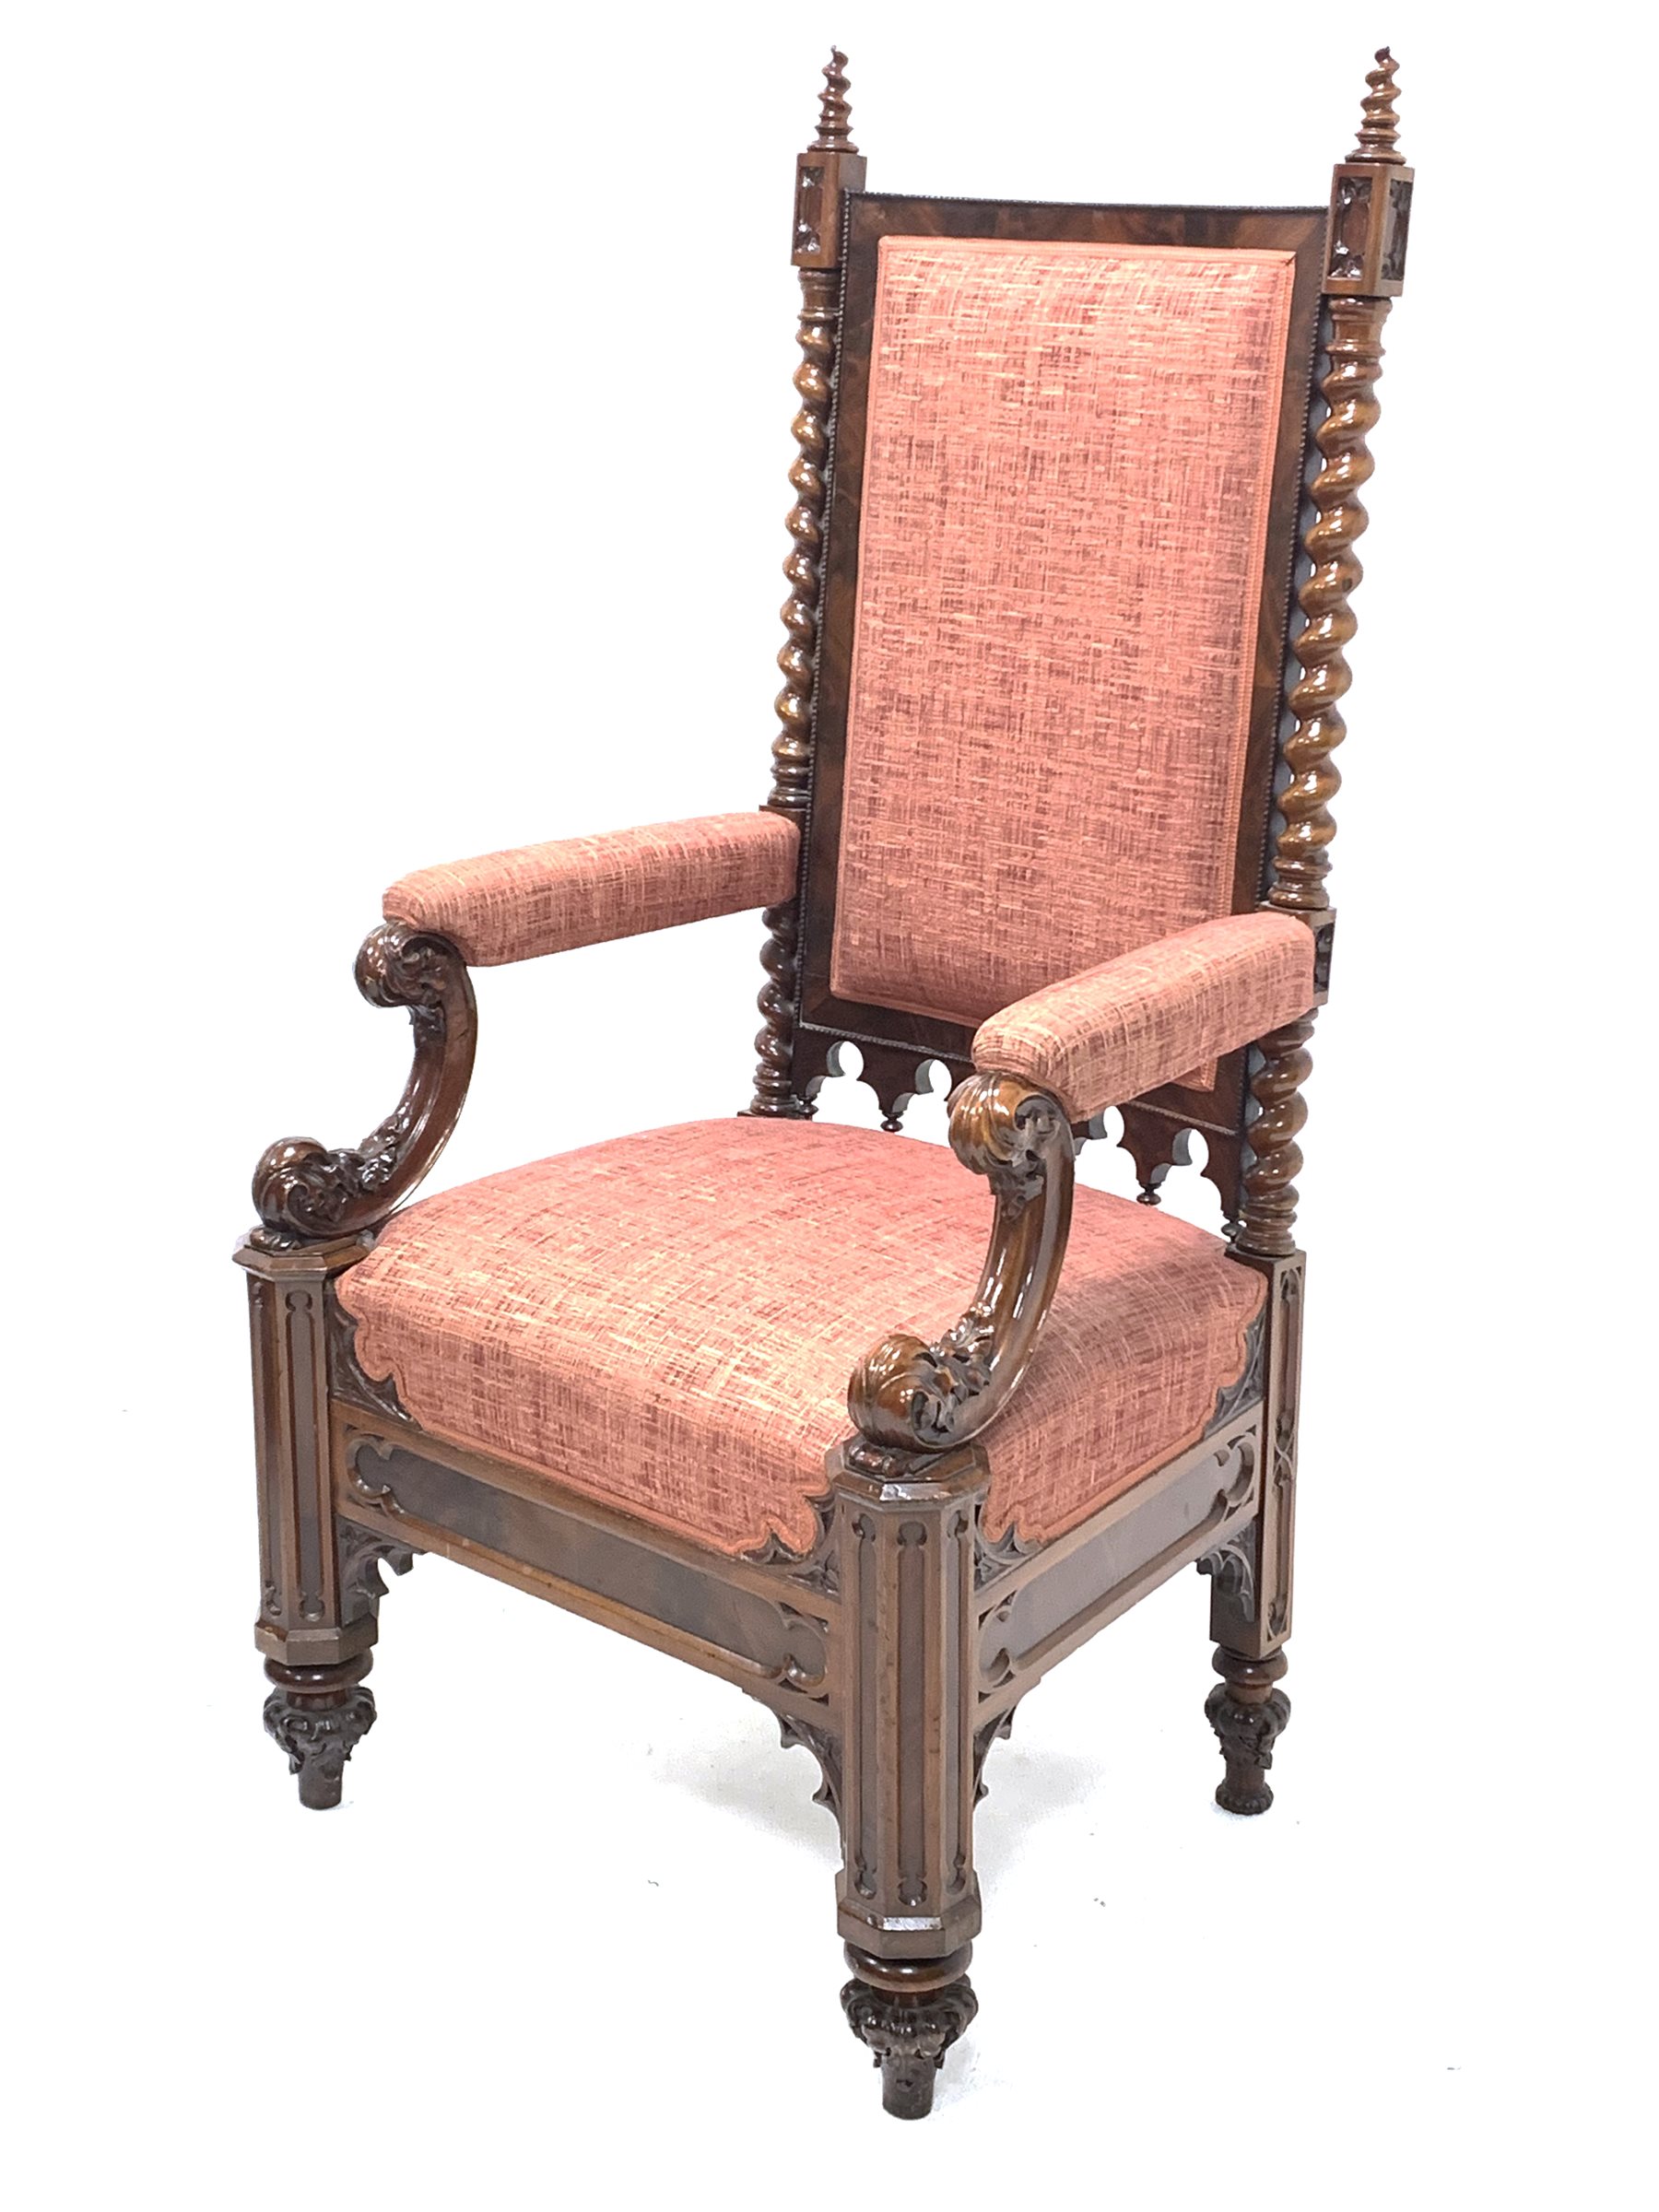 19th century Puginesque mahogany throne chair, the upholstered back surrounded by figured mahogany b - Image 2 of 12